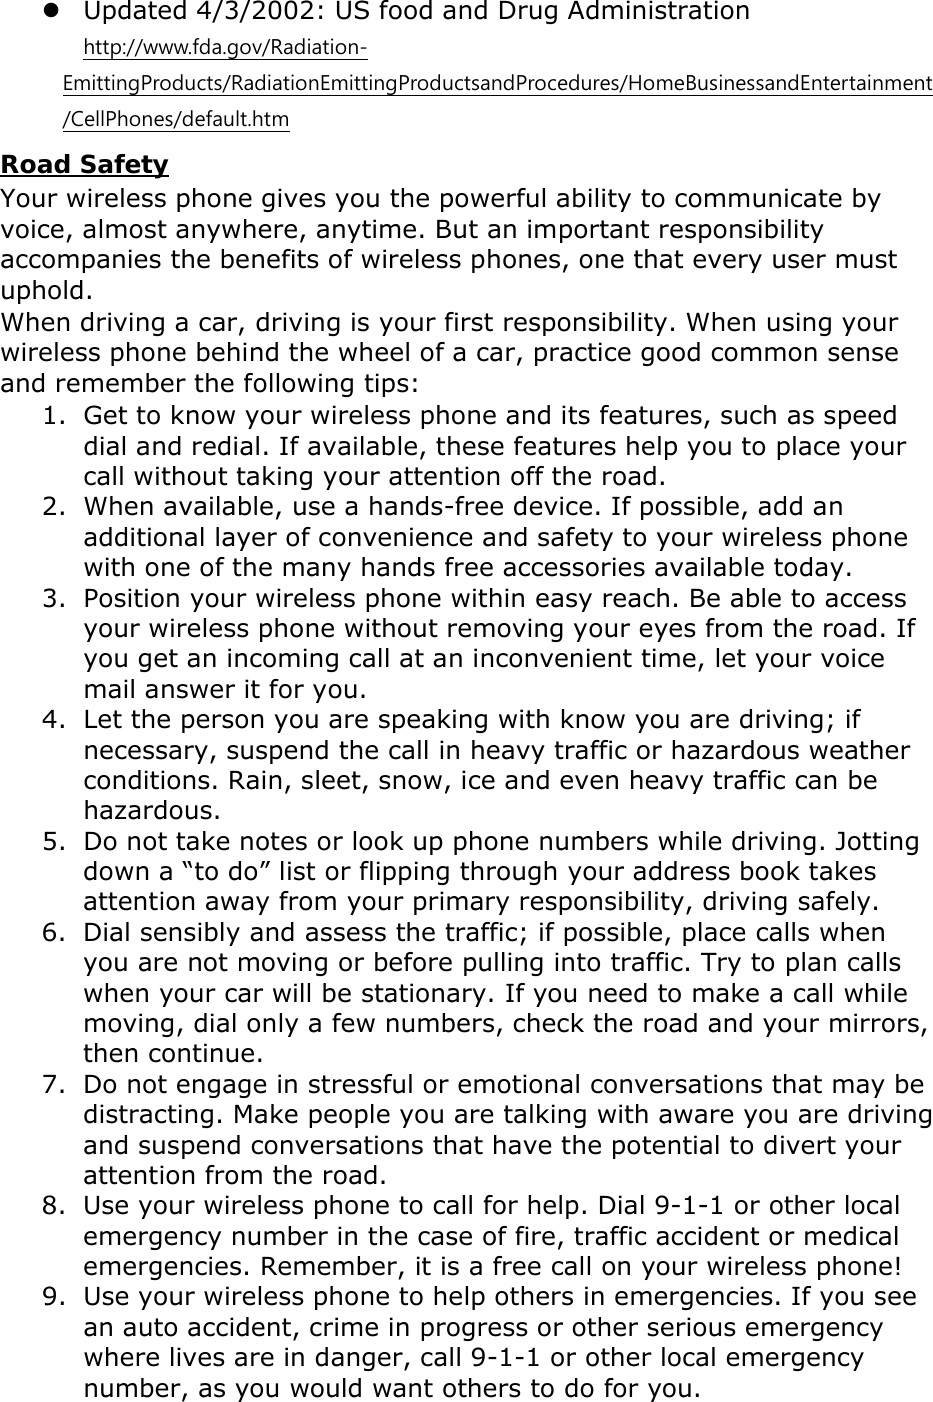  Updated 4/3/2002: US food and Drug Administration  http://www.fda.gov/Radiation-EmittingProducts/RadiationEmittingProductsandProcedures/HomeBusinessandEntertainment/CellPhones/default.htm Road Safety Your wireless phone gives you the powerful ability to communicate by voice, almost anywhere, anytime. But an important responsibility accompanies the benefits of wireless phones, one that every user must uphold. When driving a car, driving is your first responsibility. When using your wireless phone behind the wheel of a car, practice good common sense and remember the following tips: 1. Get to know your wireless phone and its features, such as speed dial and redial. If available, these features help you to place your call without taking your attention off the road. 2. When available, use a hands-free device. If possible, add an additional layer of convenience and safety to your wireless phone with one of the many hands free accessories available today. 3. Position your wireless phone within easy reach. Be able to access your wireless phone without removing your eyes from the road. If you get an incoming call at an inconvenient time, let your voice mail answer it for you. 4. Let the person you are speaking with know you are driving; if necessary, suspend the call in heavy traffic or hazardous weather conditions. Rain, sleet, snow, ice and even heavy traffic can be hazardous. 5. Do not take notes or look up phone numbers while driving. Jotting down a “to do” list or flipping through your address book takes attention away from your primary responsibility, driving safely. 6. Dial sensibly and assess the traffic; if possible, place calls when you are not moving or before pulling into traffic. Try to plan calls when your car will be stationary. If you need to make a call while moving, dial only a few numbers, check the road and your mirrors, then continue. 7. Do not engage in stressful or emotional conversations that may be distracting. Make people you are talking with aware you are driving and suspend conversations that have the potential to divert your attention from the road. 8. Use your wireless phone to call for help. Dial 9-1-1 or other local emergency number in the case of fire, traffic accident or medical emergencies. Remember, it is a free call on your wireless phone! 9. Use your wireless phone to help others in emergencies. If you see an auto accident, crime in progress or other serious emergency where lives are in danger, call 9-1-1 or other local emergency number, as you would want others to do for you. 